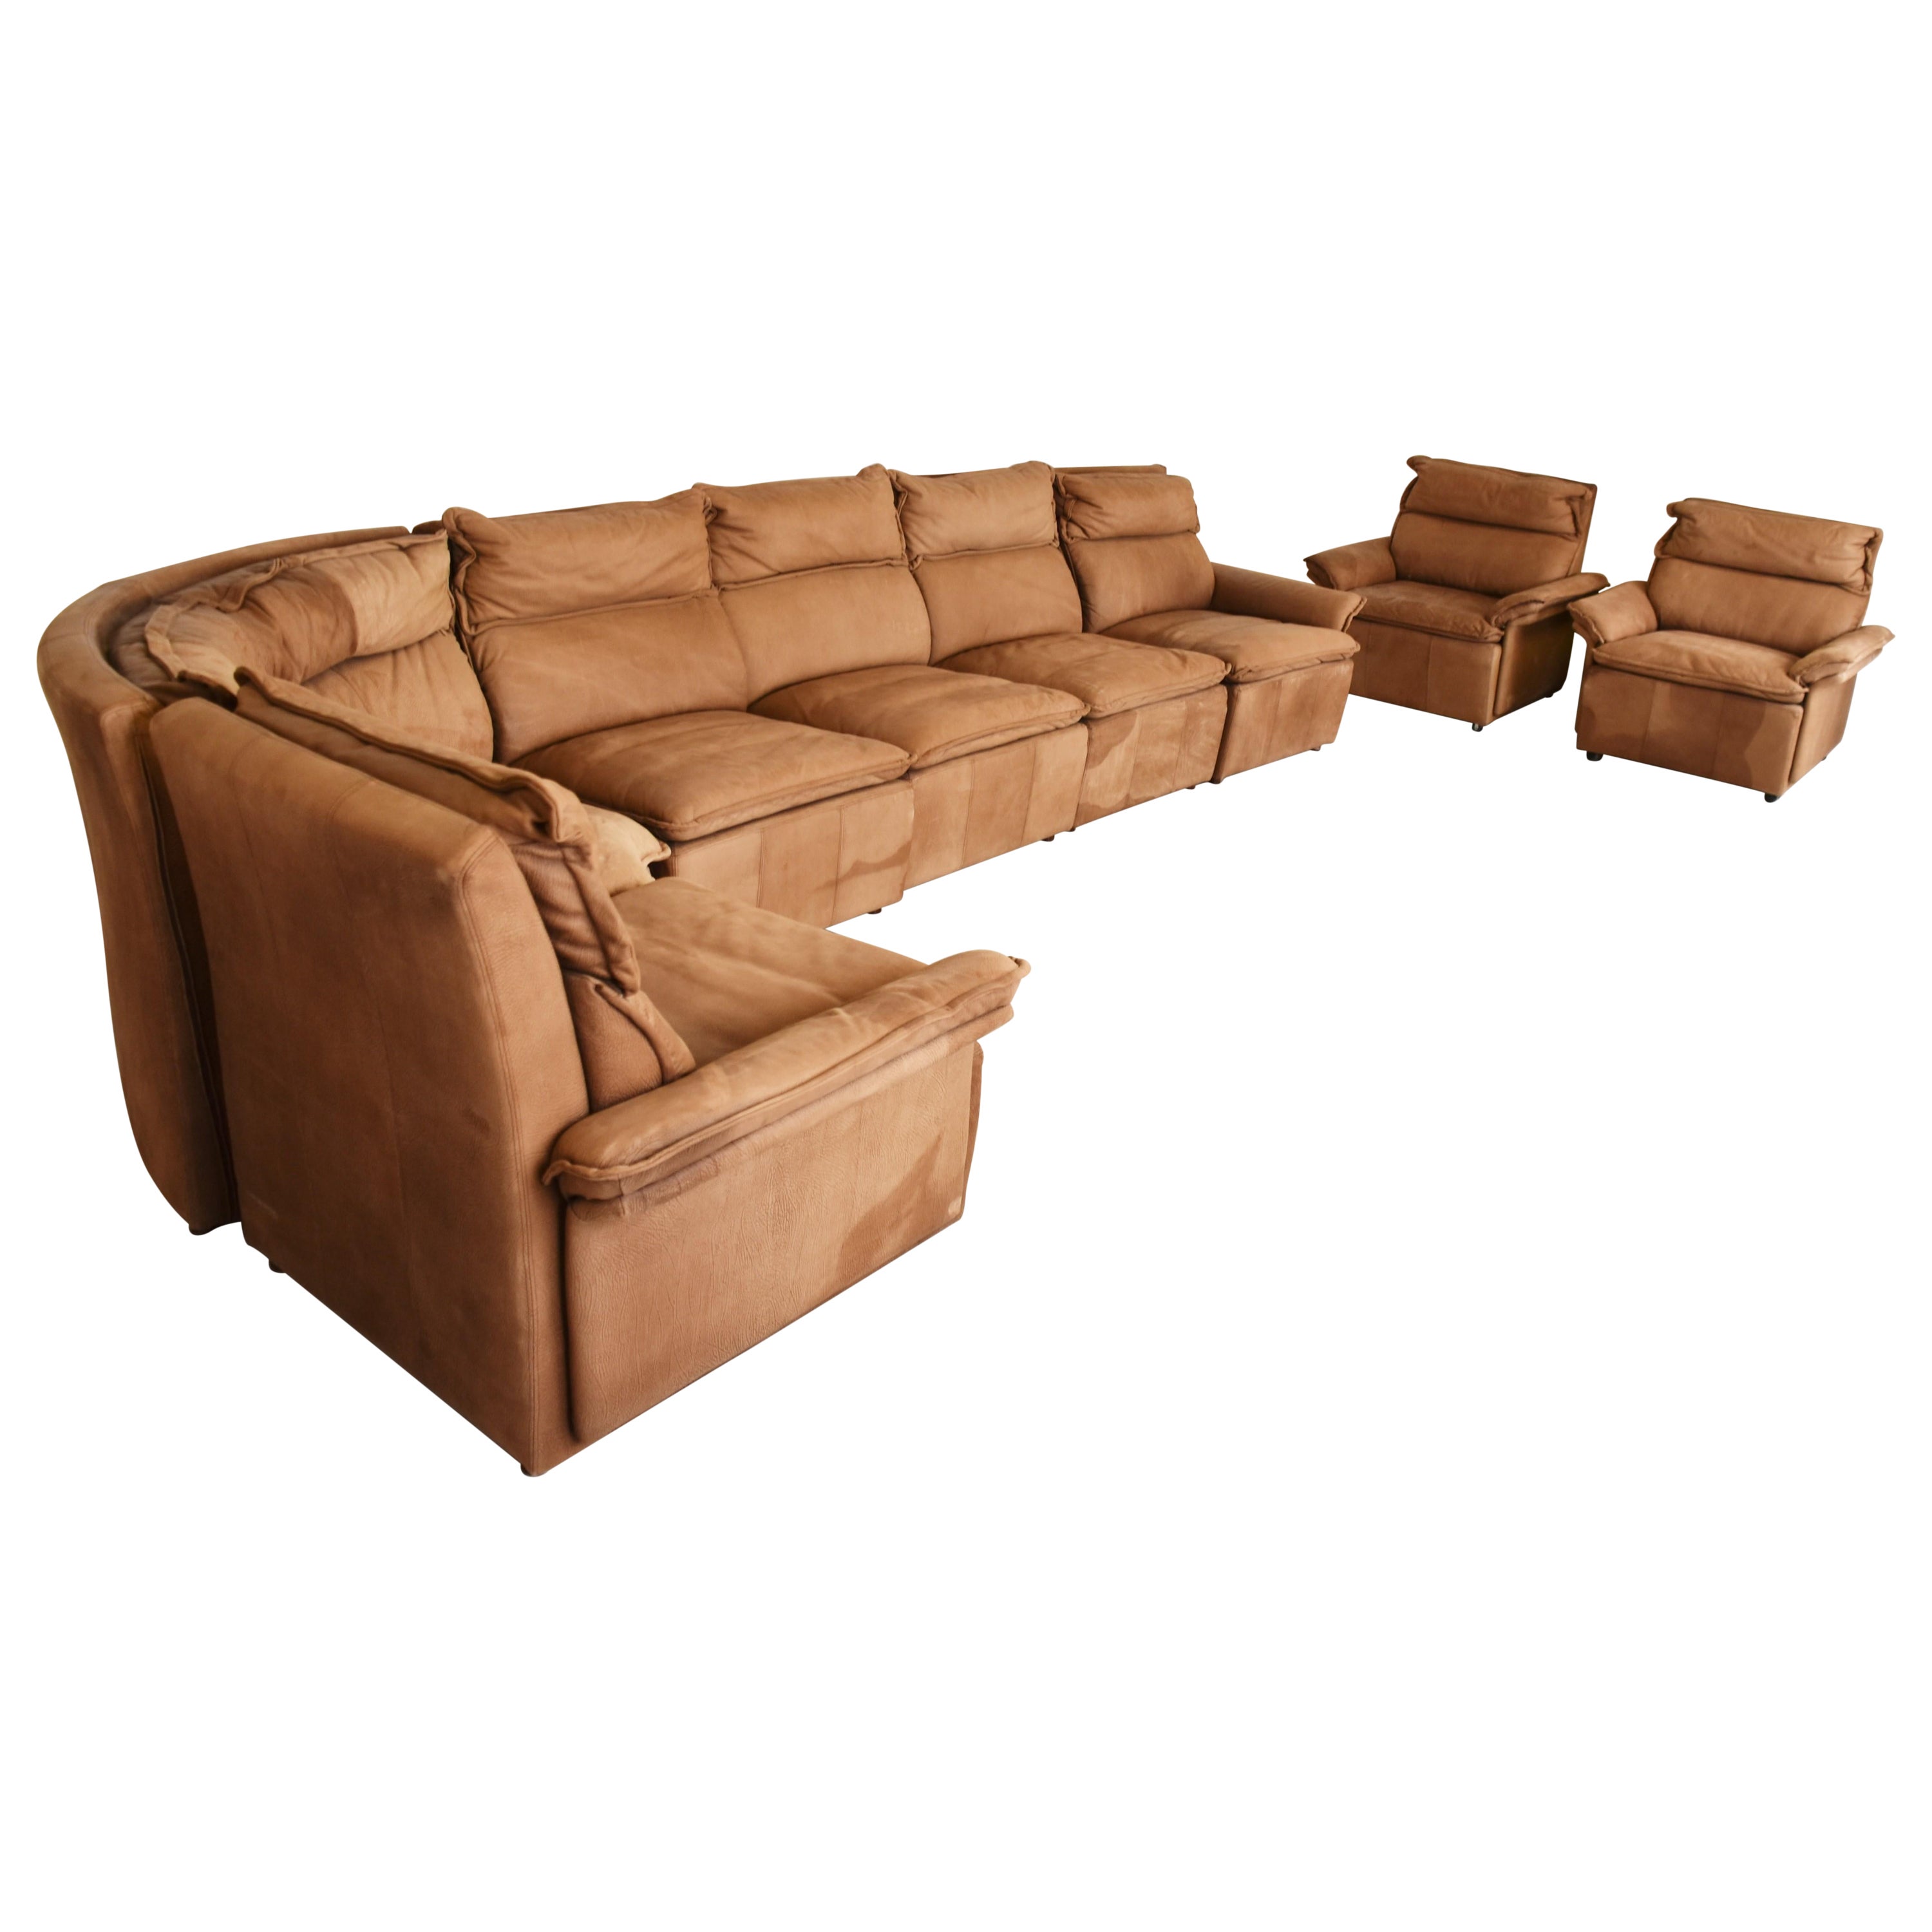 Vintage Brown Leather Modular Sofa by Laauser, 1960s